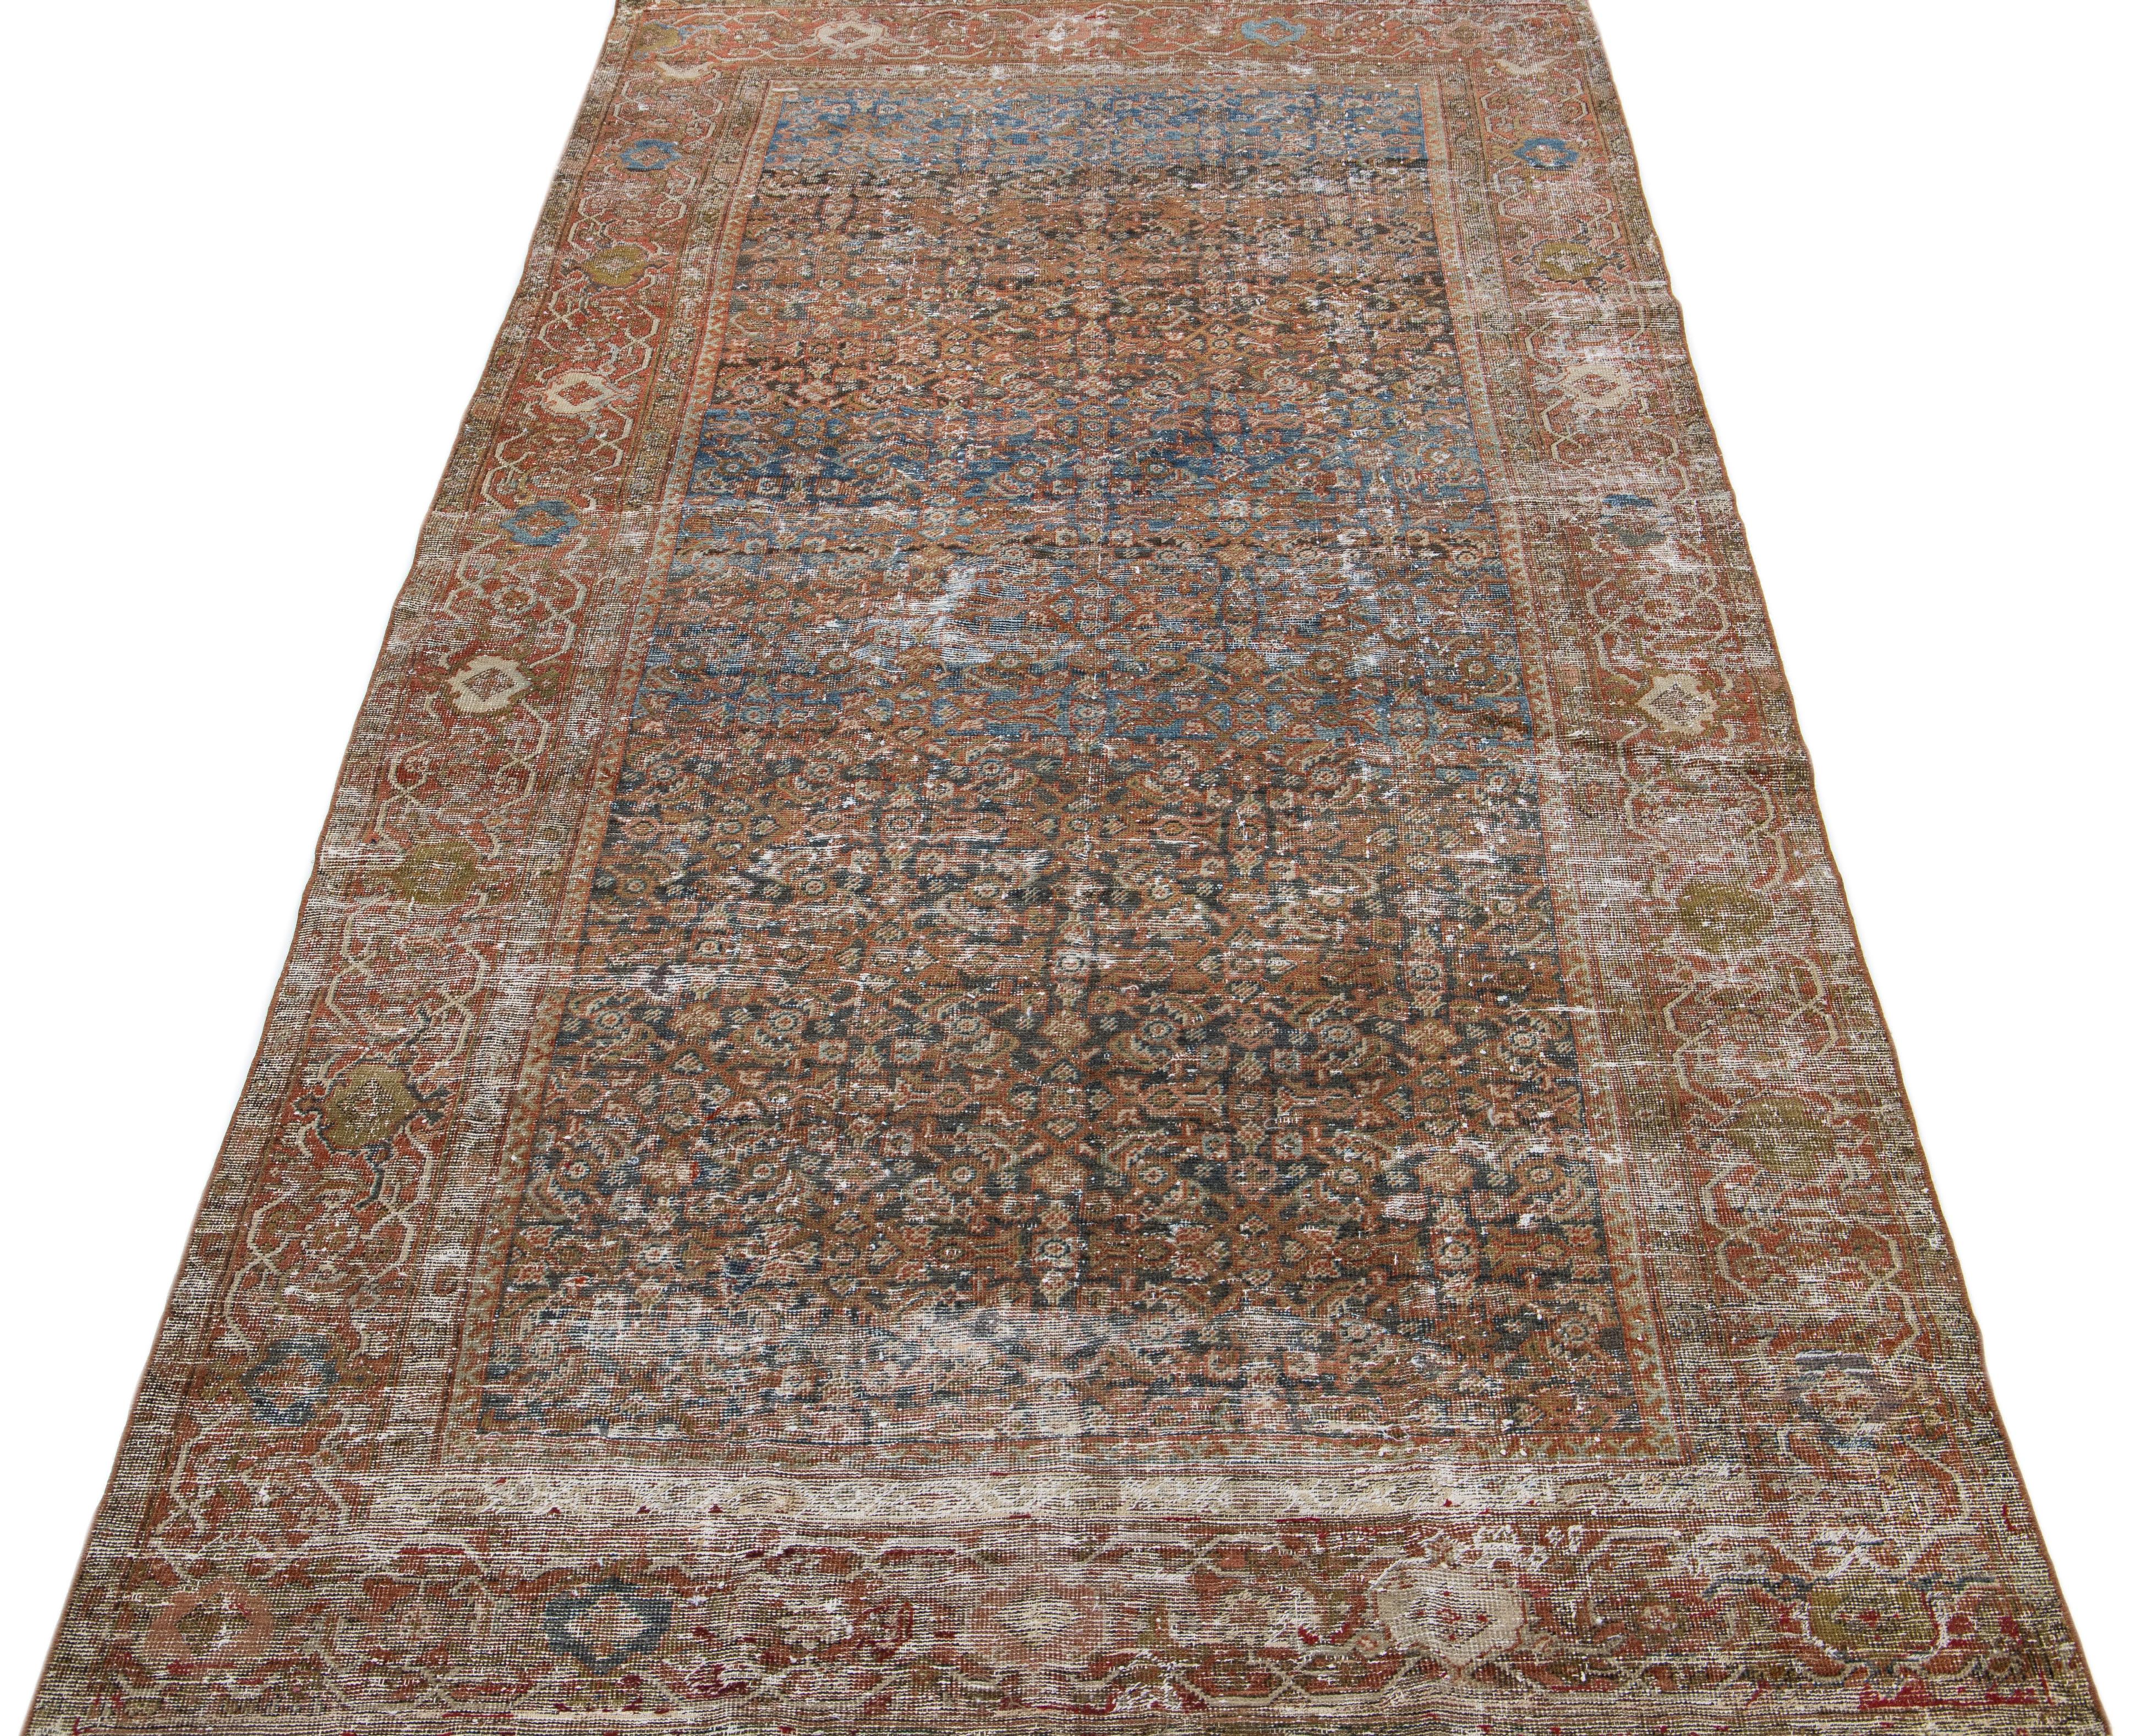 Beautiful hand-knotted antique mahal wool rug with a blue color field. This Persian rug has rust and brown accent colors in an all-over floral design.

This rug measures: 4' 11